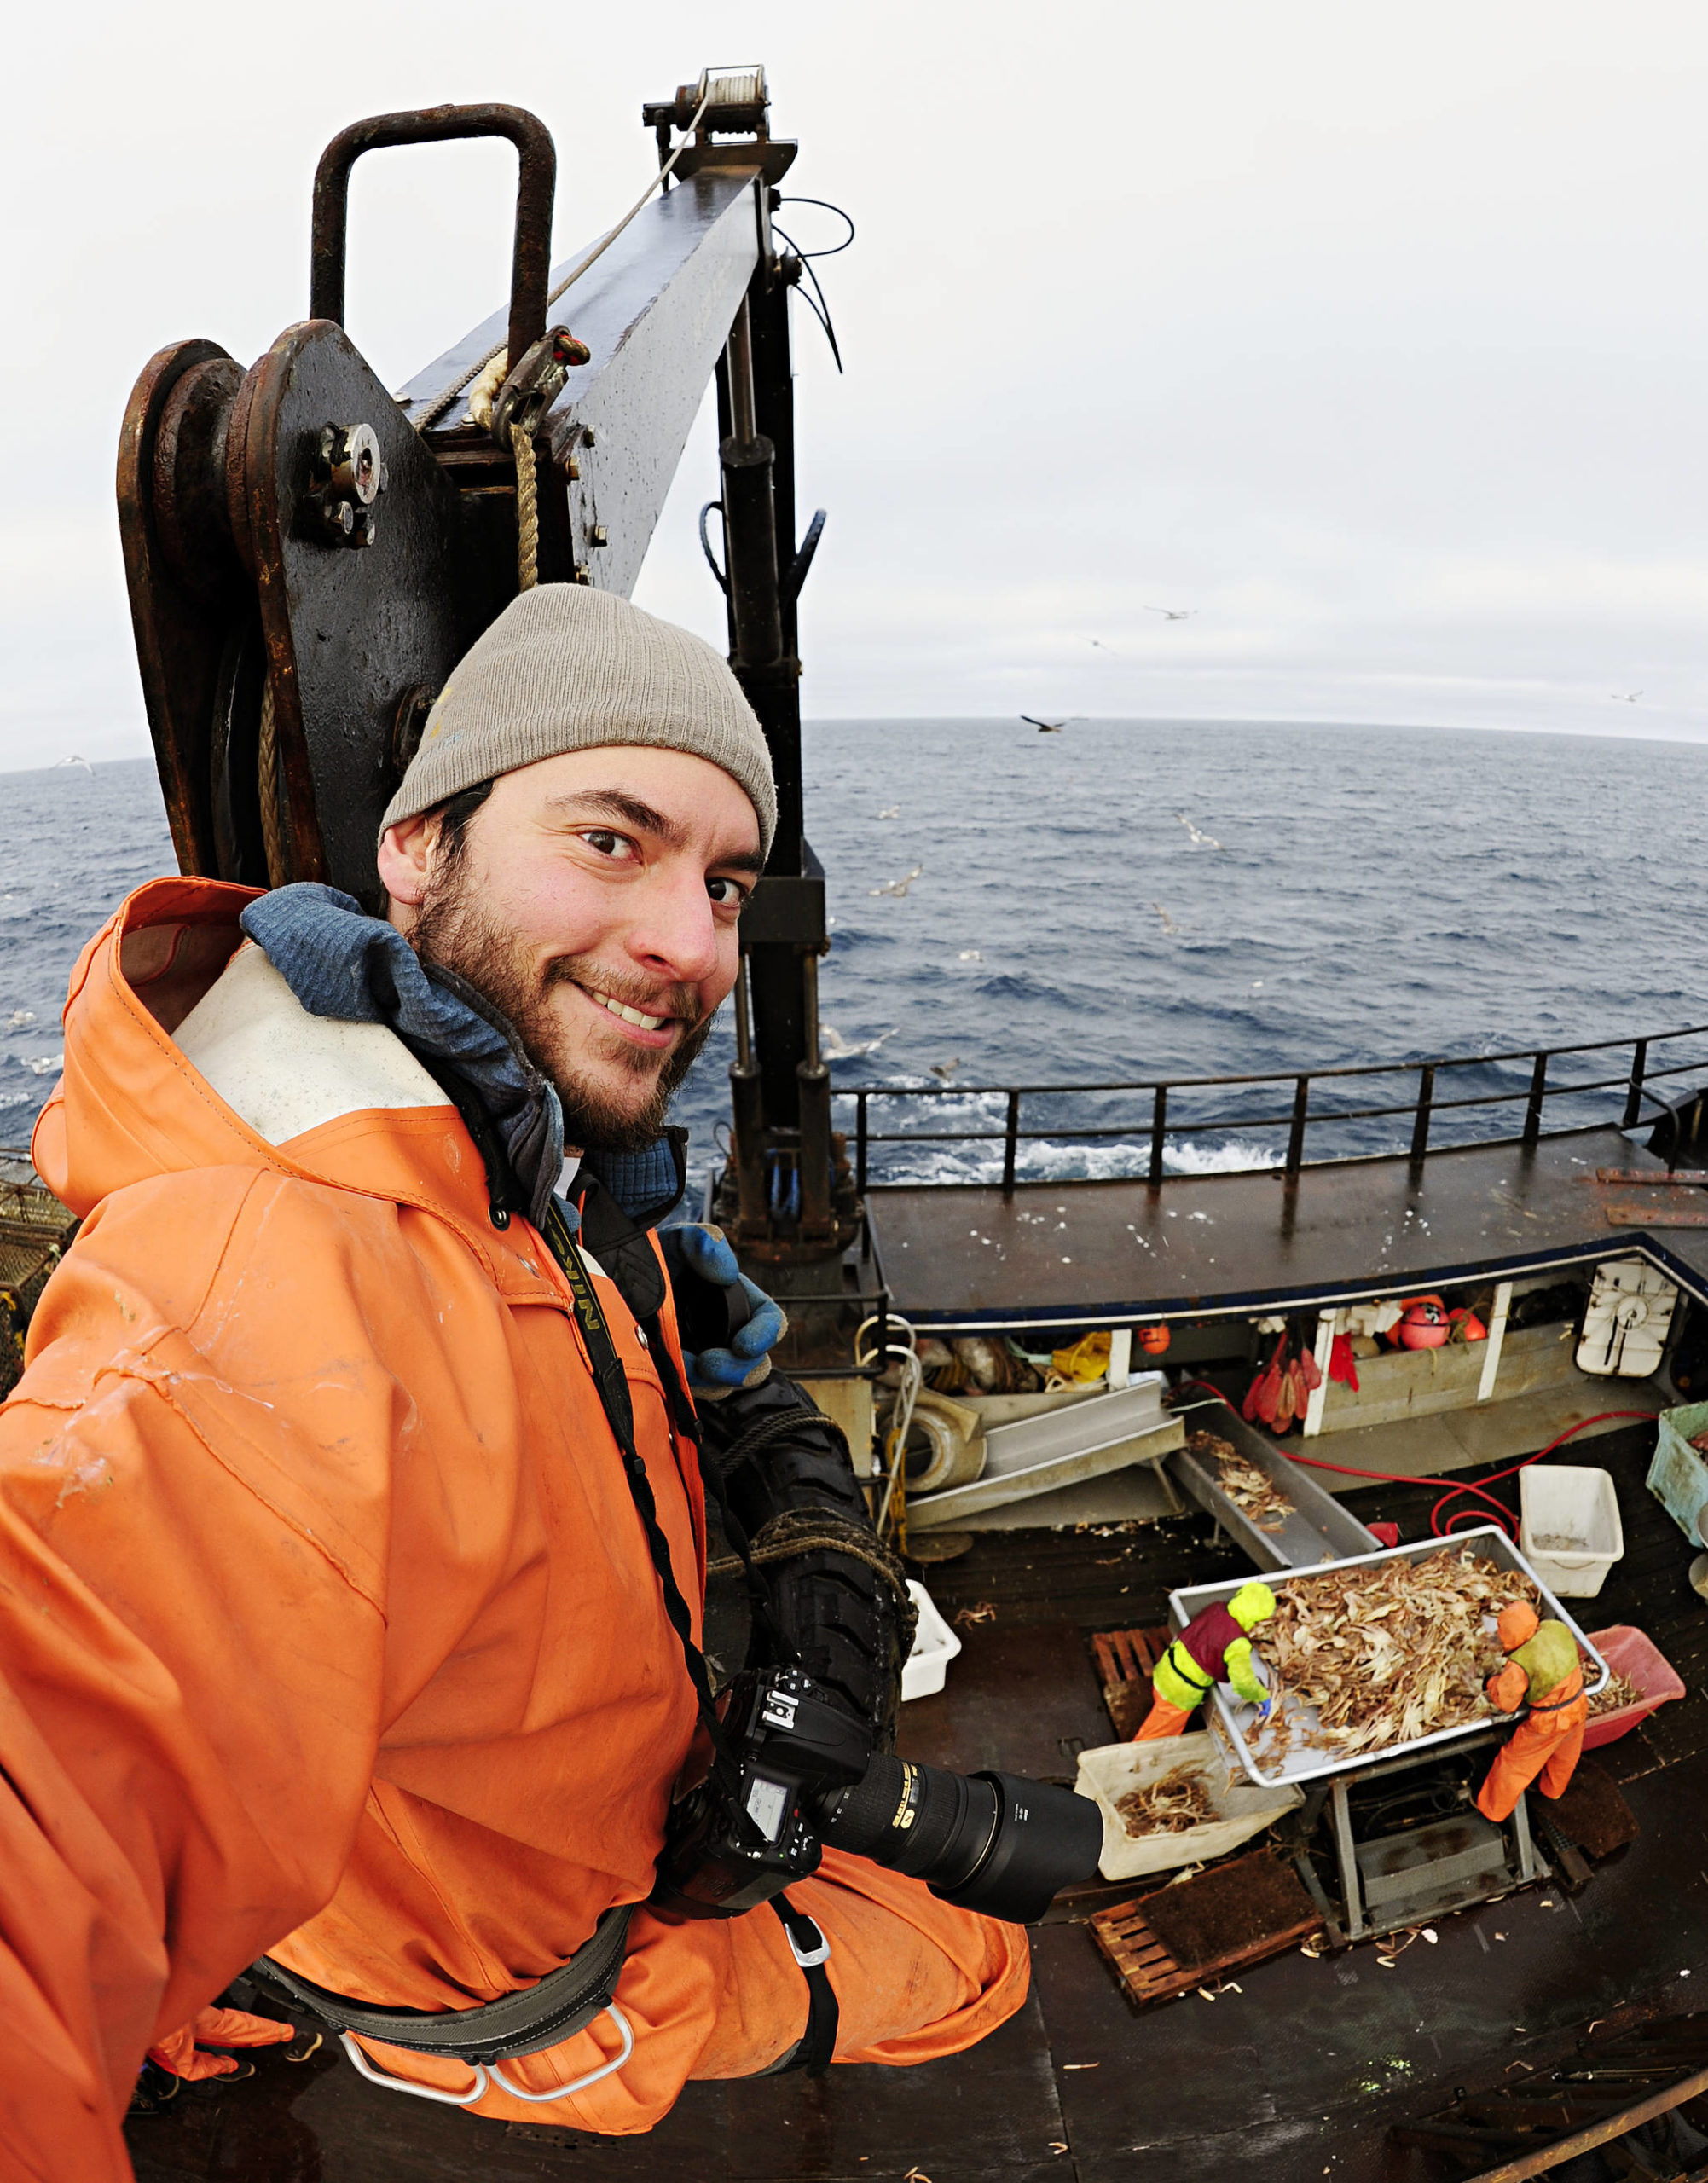 Chris Miller photographing the Bering Sea crab fishery. (Courtesy Photo / Chris Miller)